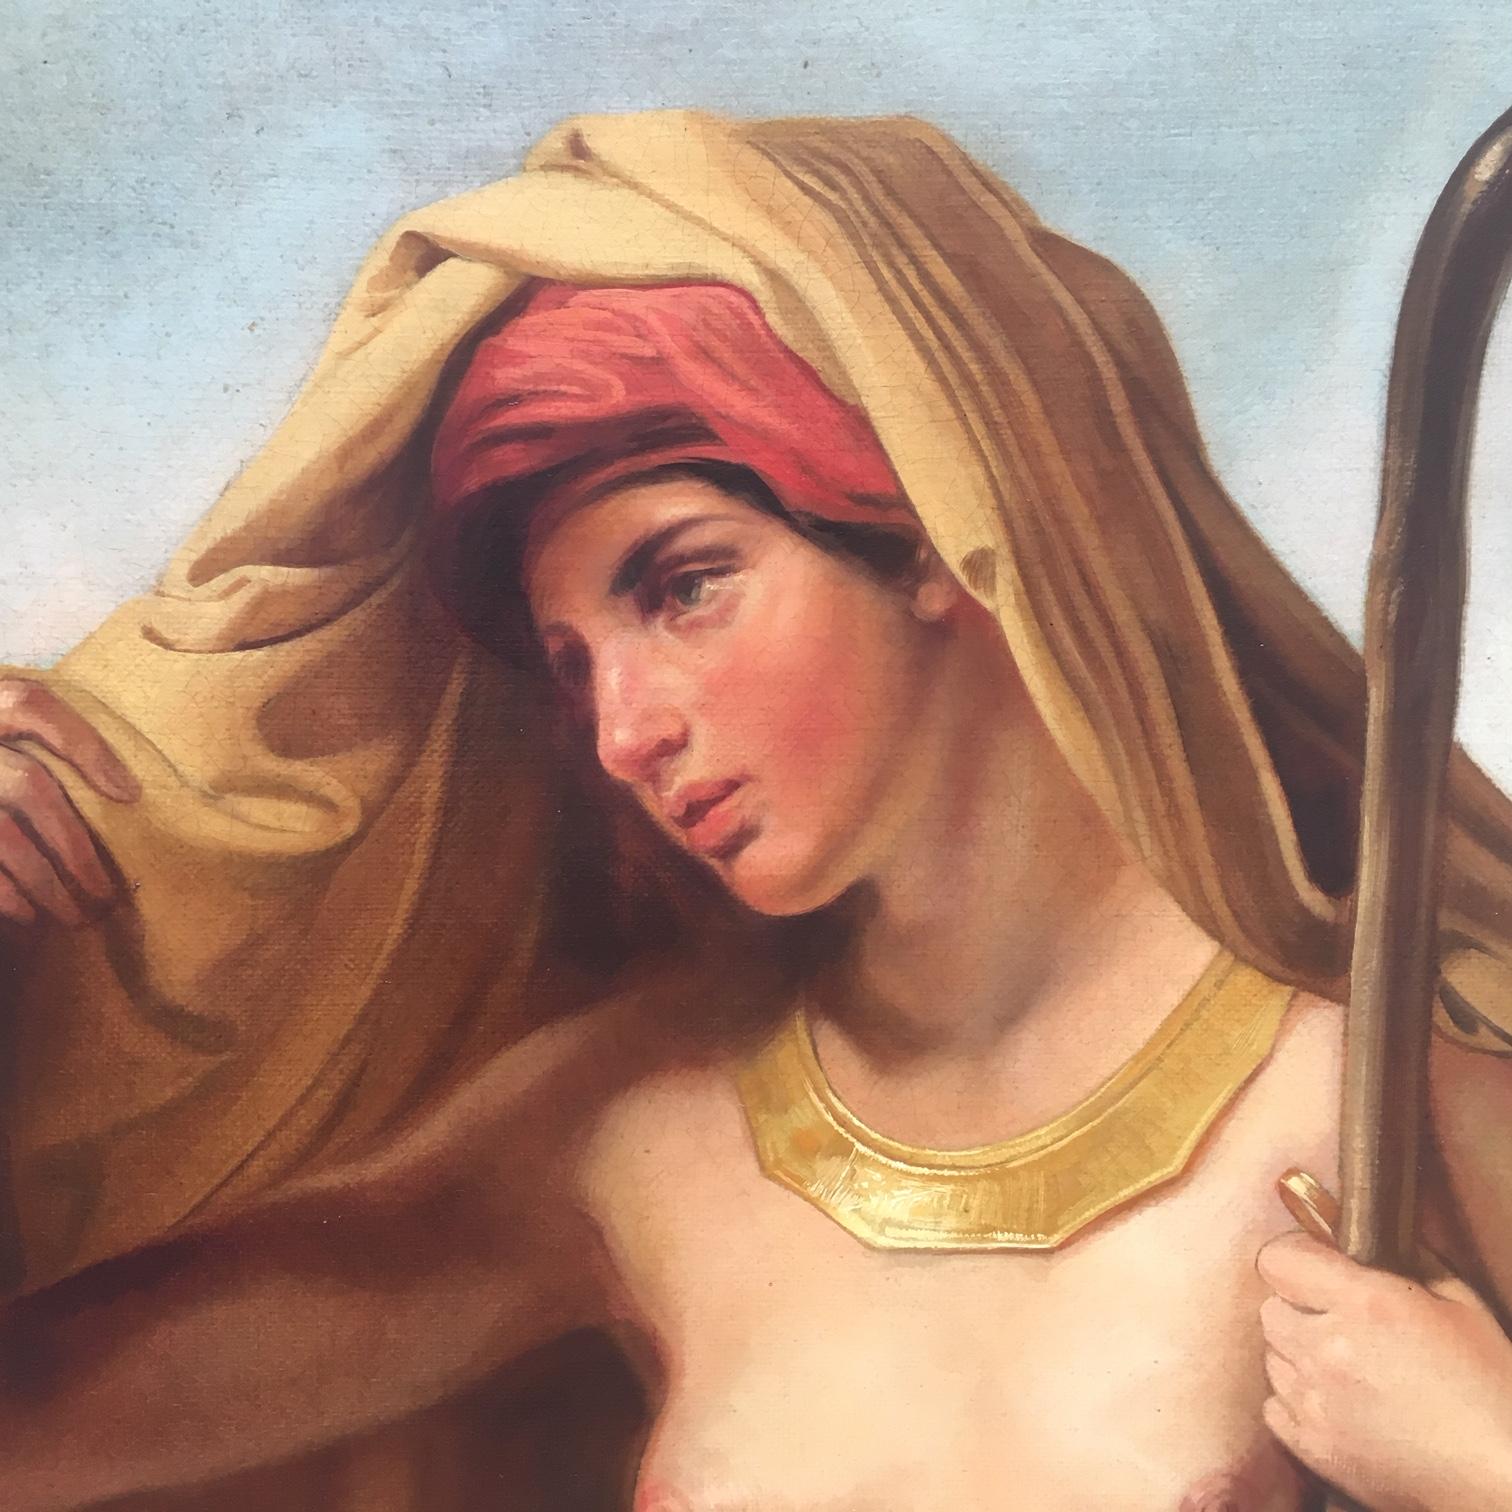 Tamar of Judah - Angelo Granati Italia 2008  Oil on canvas cm.100x80. 
This is his reinterpretation of a greatest old master painting by Francesco Paolo Hayez.
Gold leaf gilded wooden frame available on request

The resplendent Tamar, which seems to